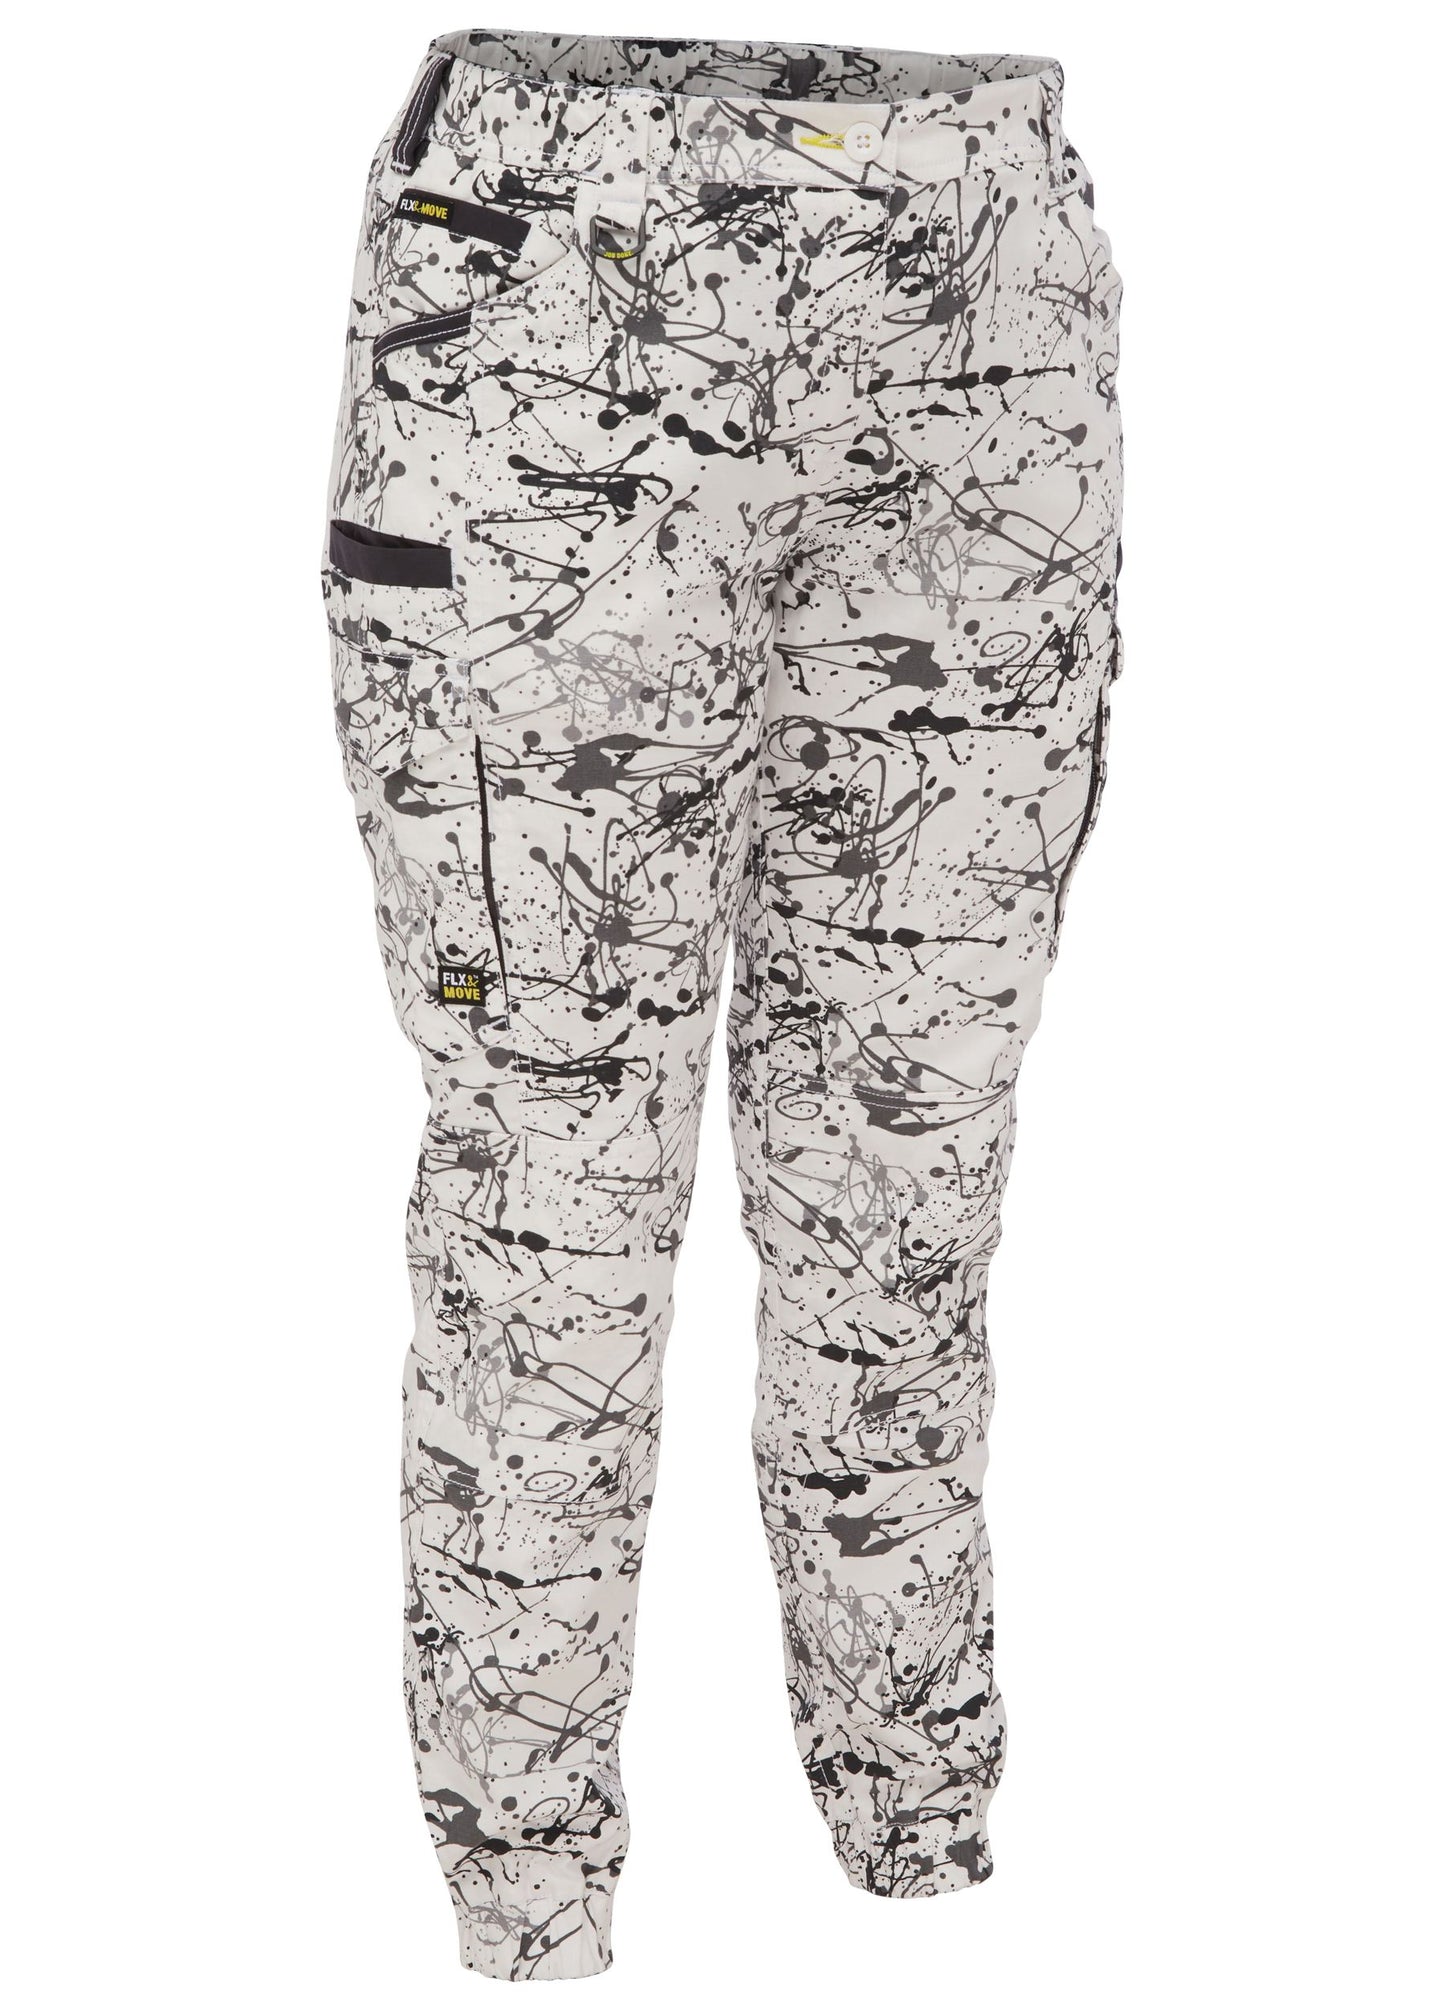 WOMEN'S FLX & MOVE™ STRETCH CAMO CARGO PANTS - LIMITED EDITION  BPCL6337